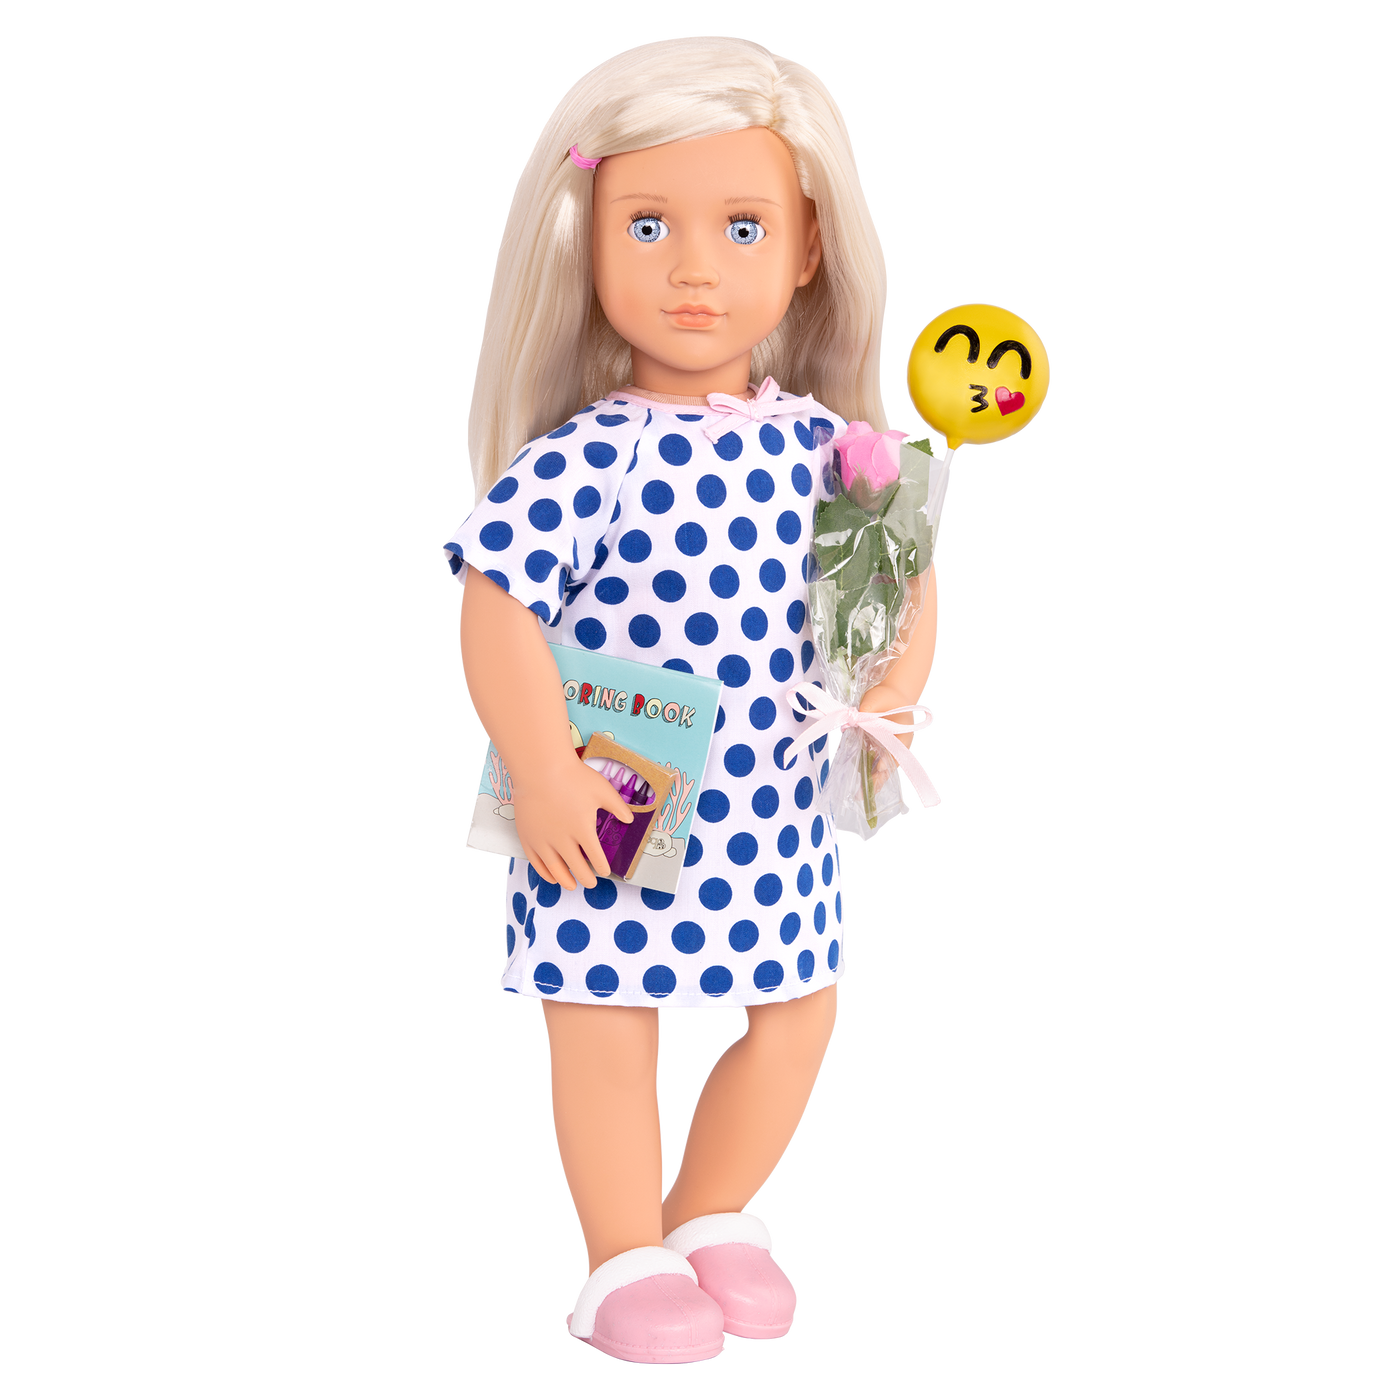 18-inch doll with hospital stay accessories